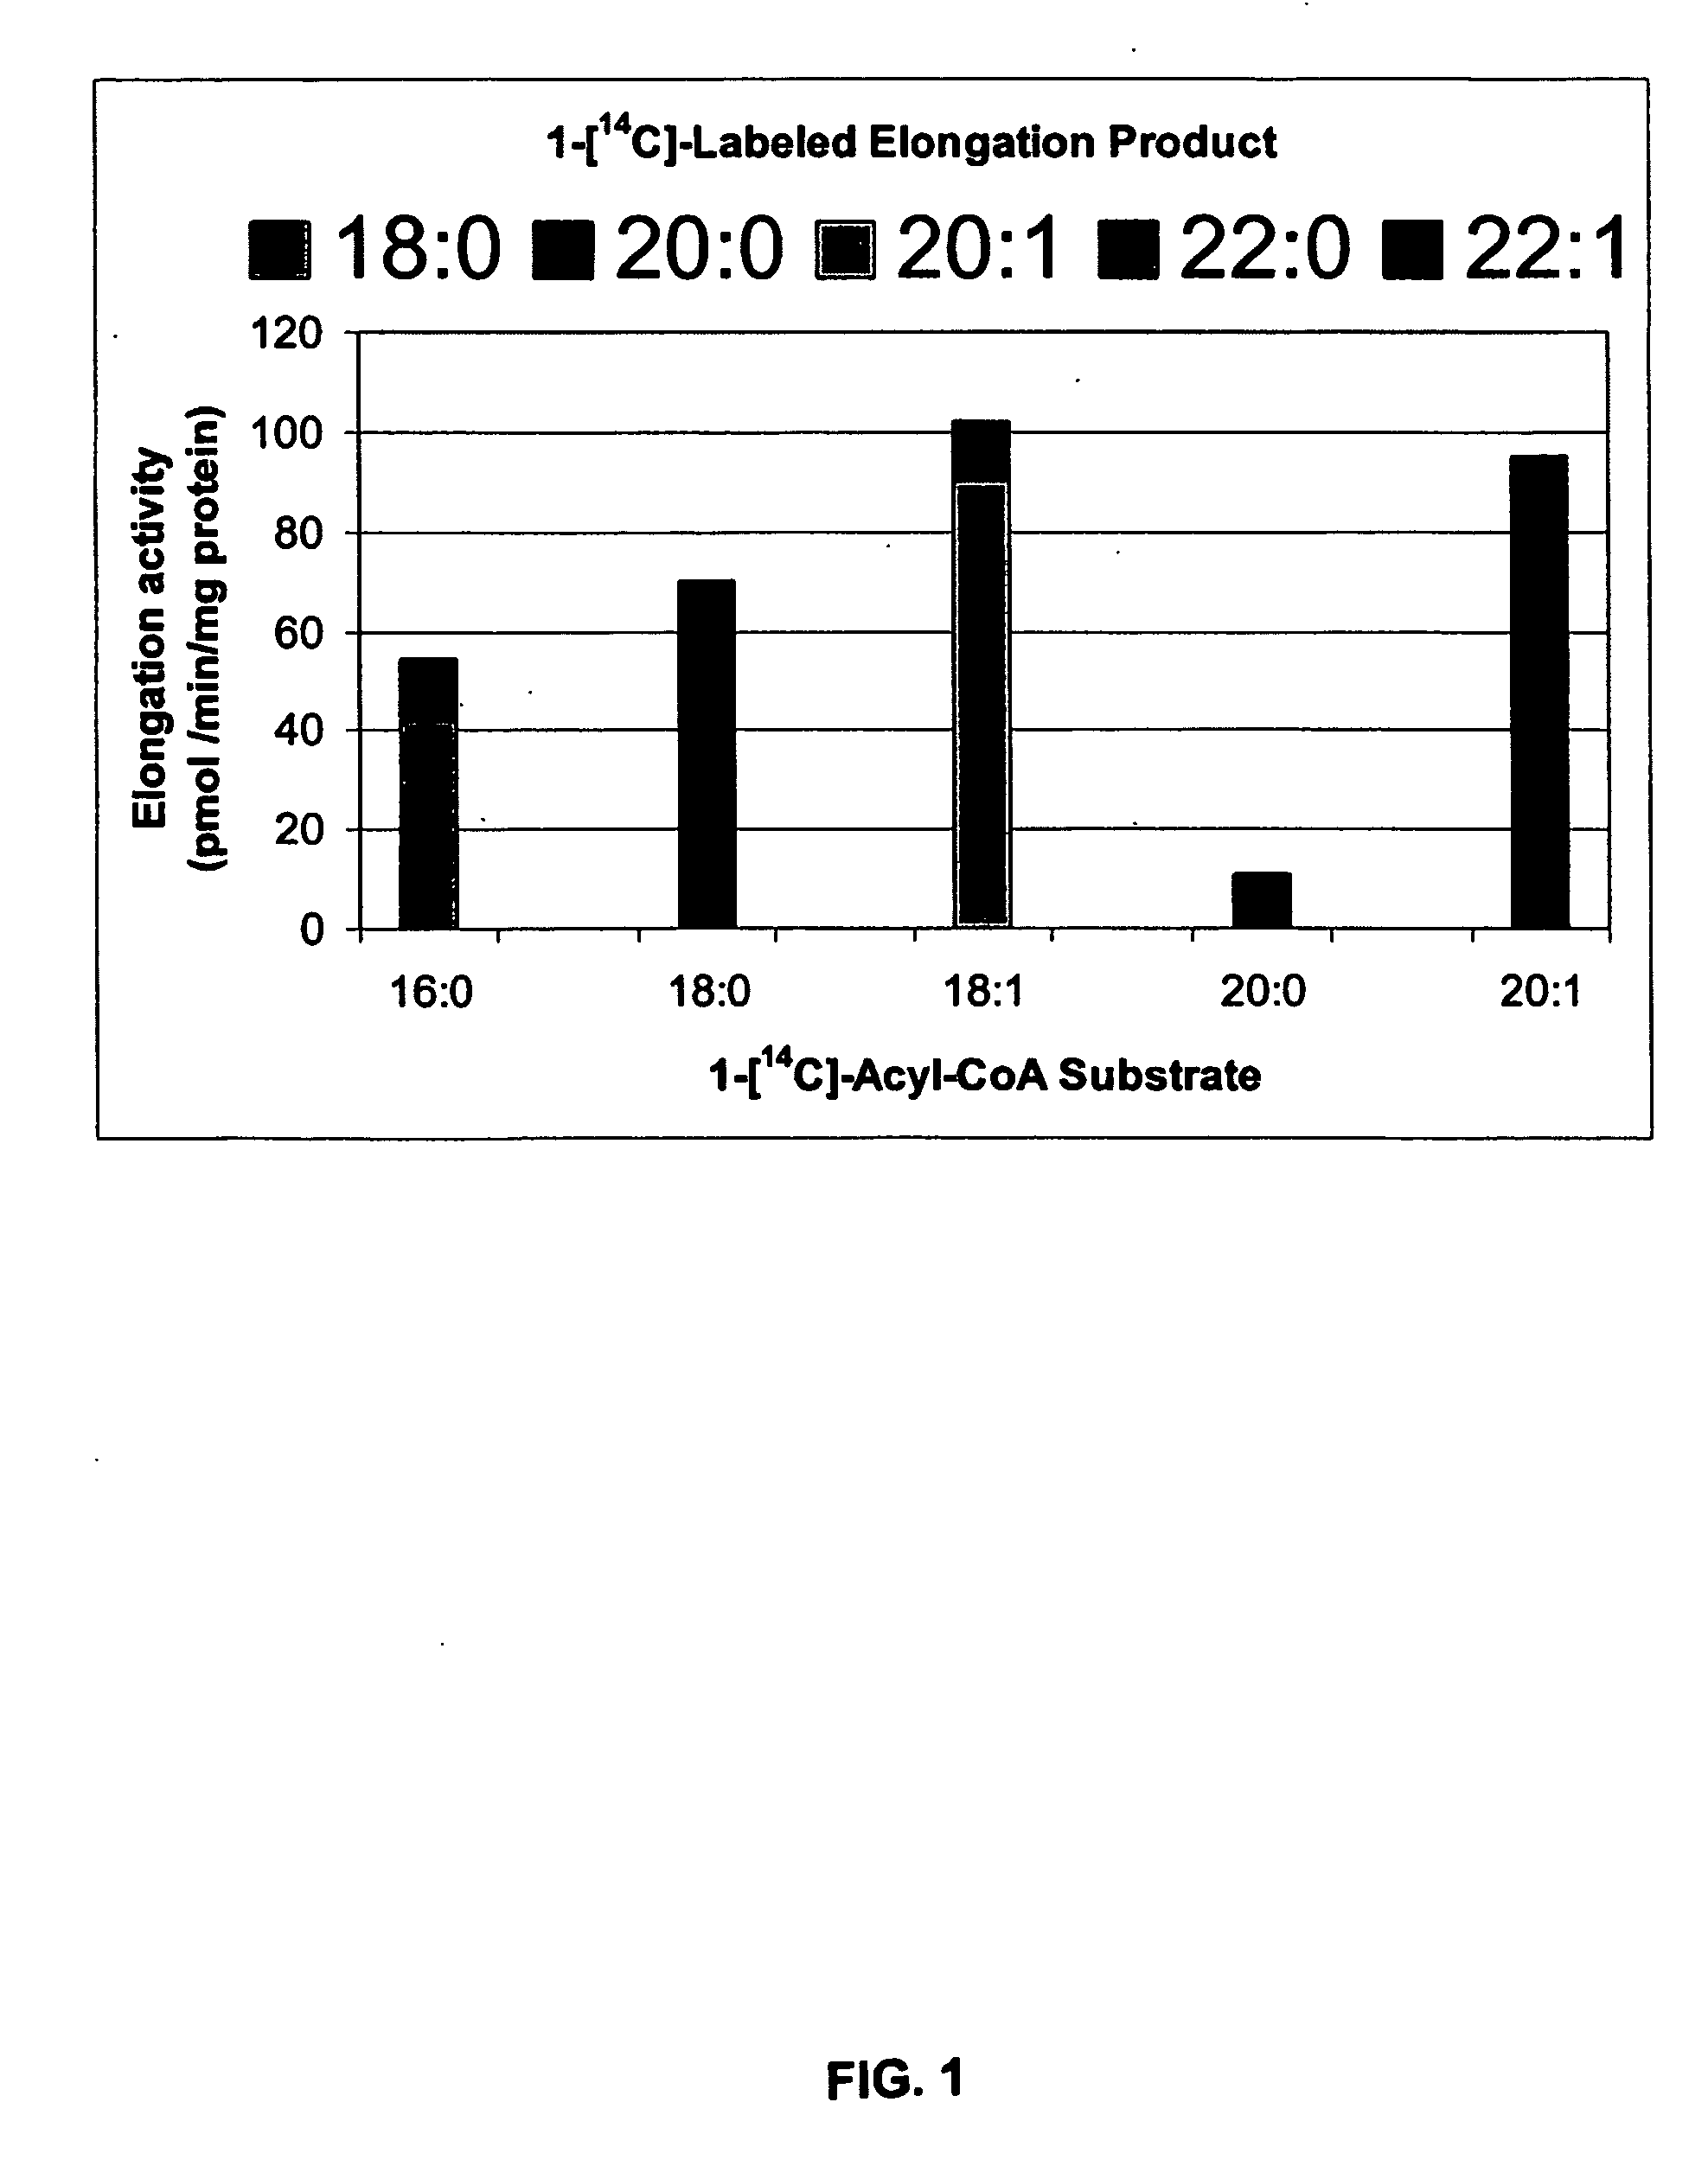 Fatty Acid Elongase (Fae) Genes And Their Utility In Increasing Erucic Acid And Other Very Long-Chain Fatty Acid Proportions In Seed Oil.